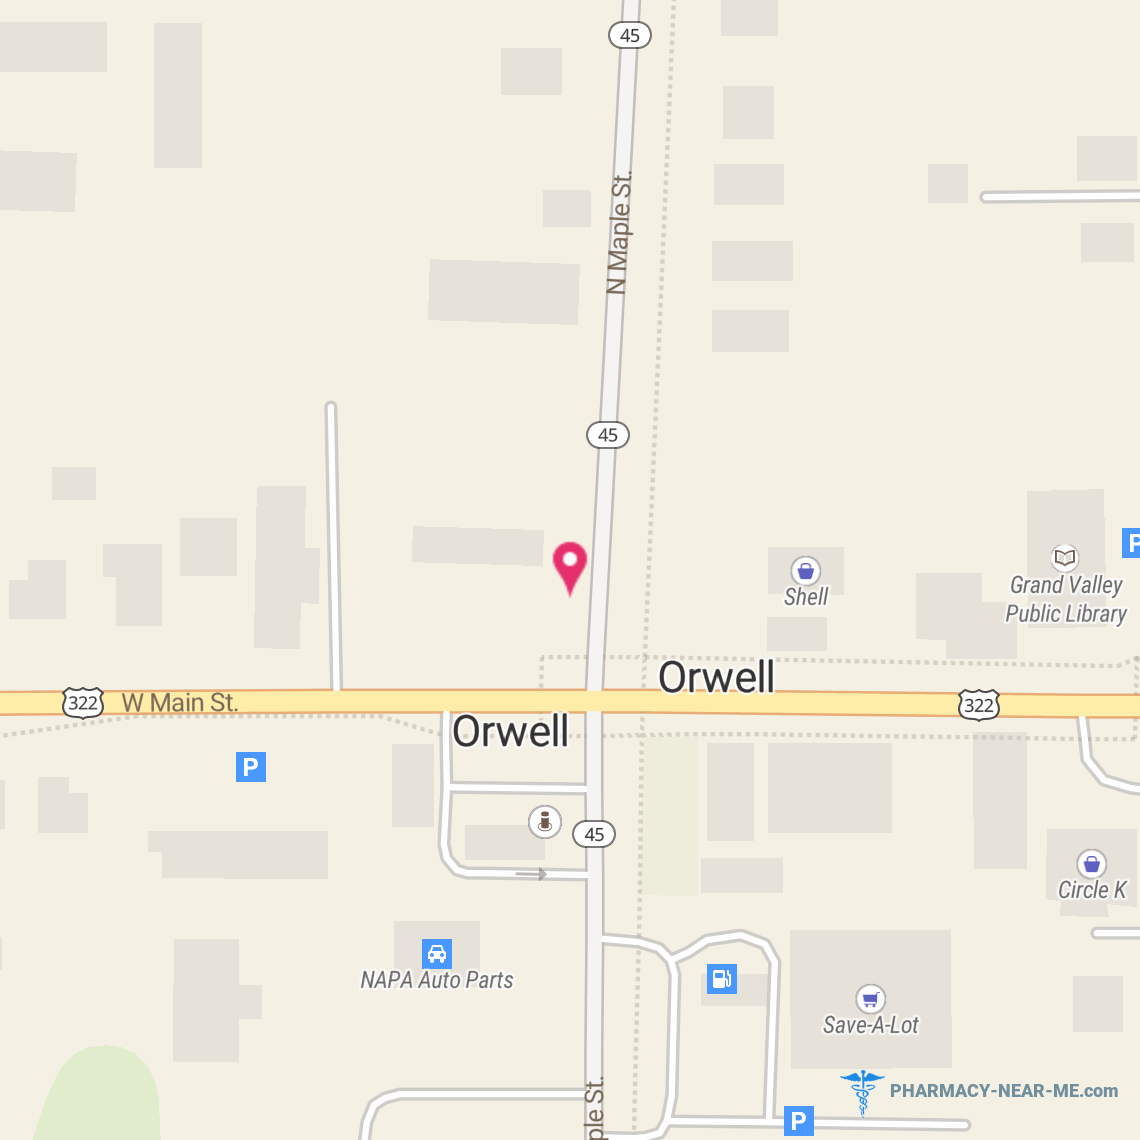 GRAND VALLEY DRUG - Pharmacy Hours, Phone, Reviews & Information: 11 North Maple Street, Orwell, Ohio 44076, United States